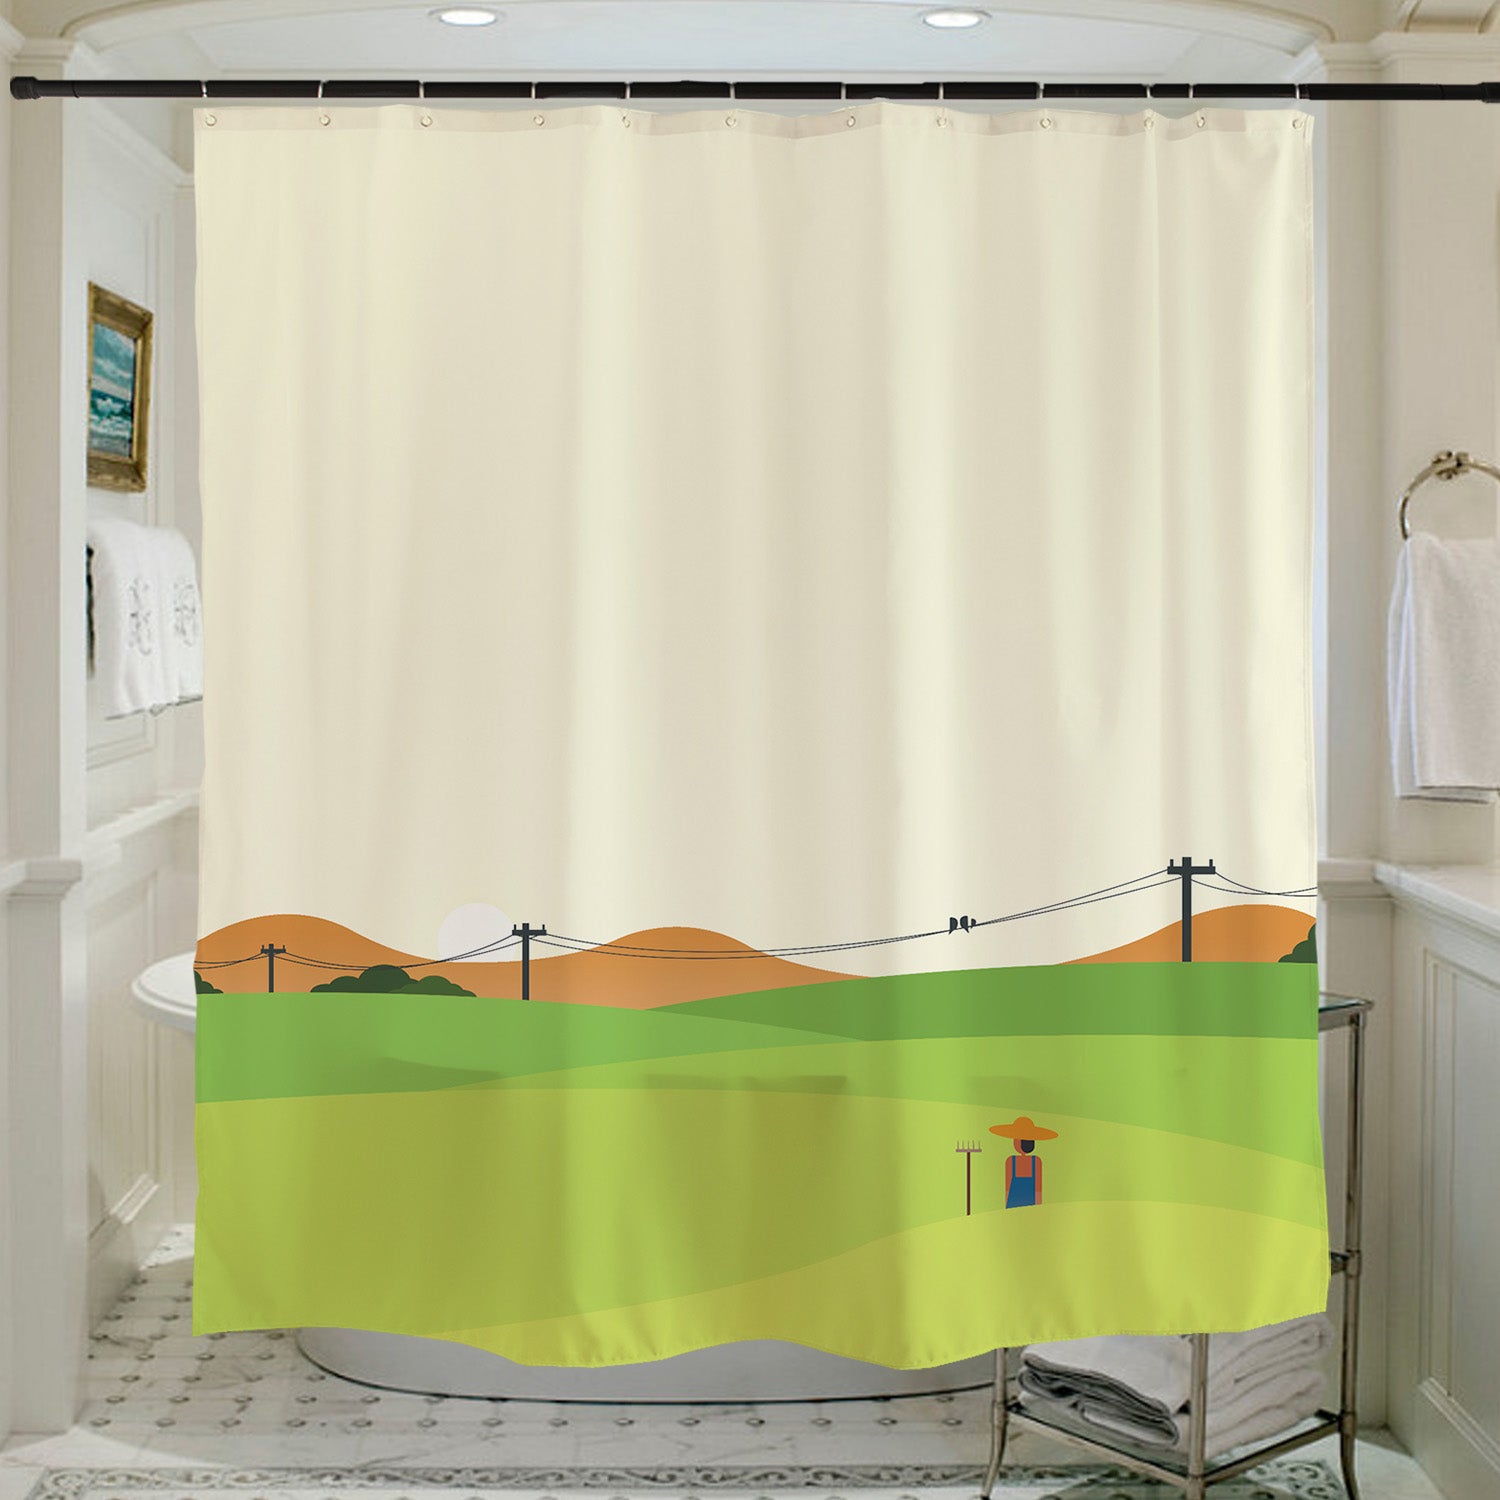 Feblilac Green field Shower Curtain with Hooks